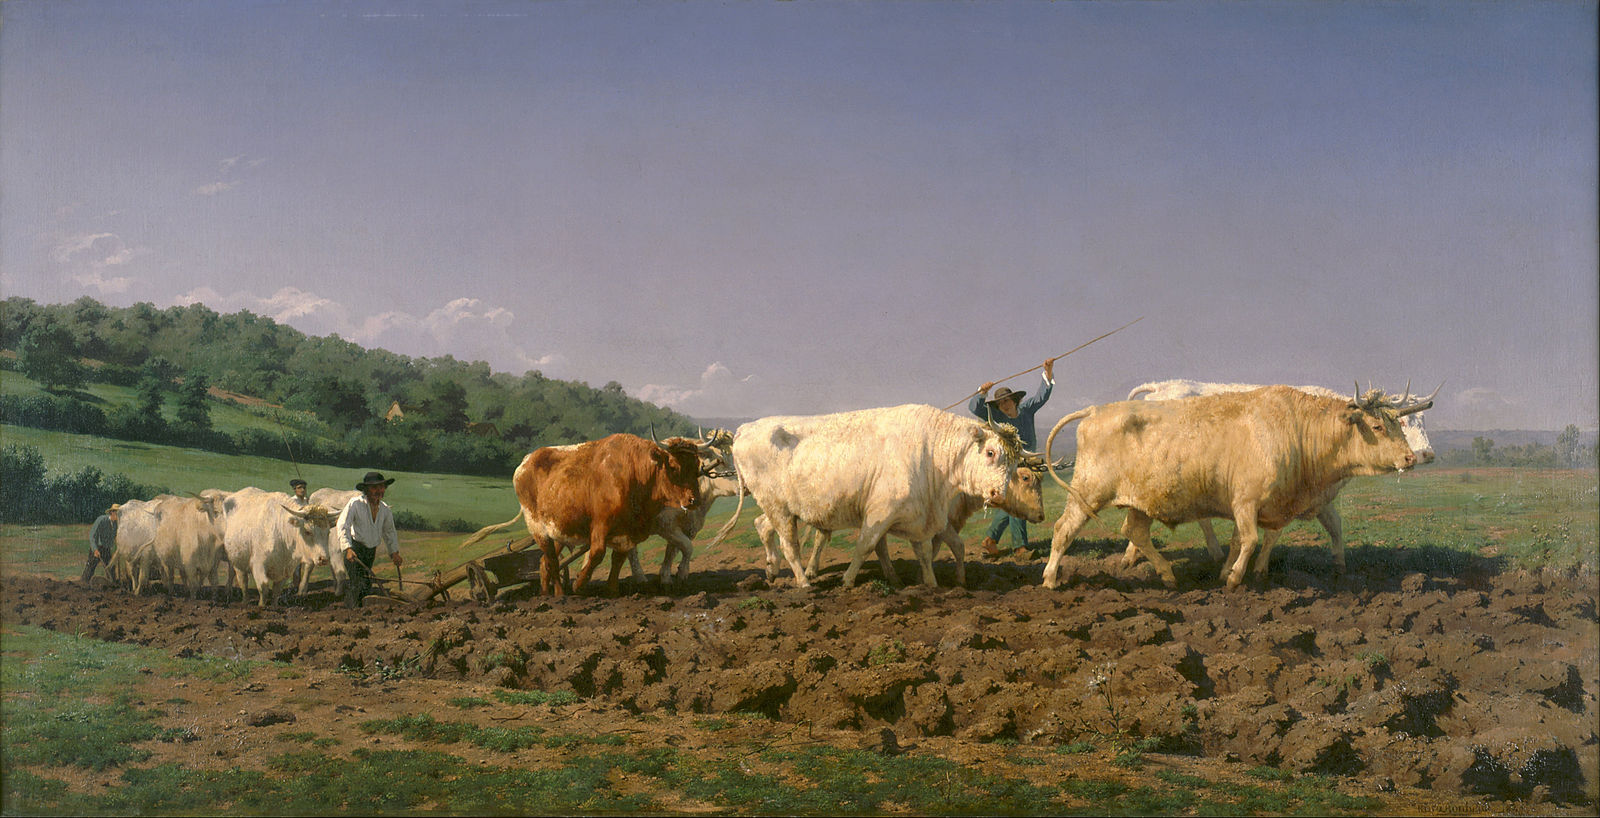 Four men driving a team of animals plowing a field